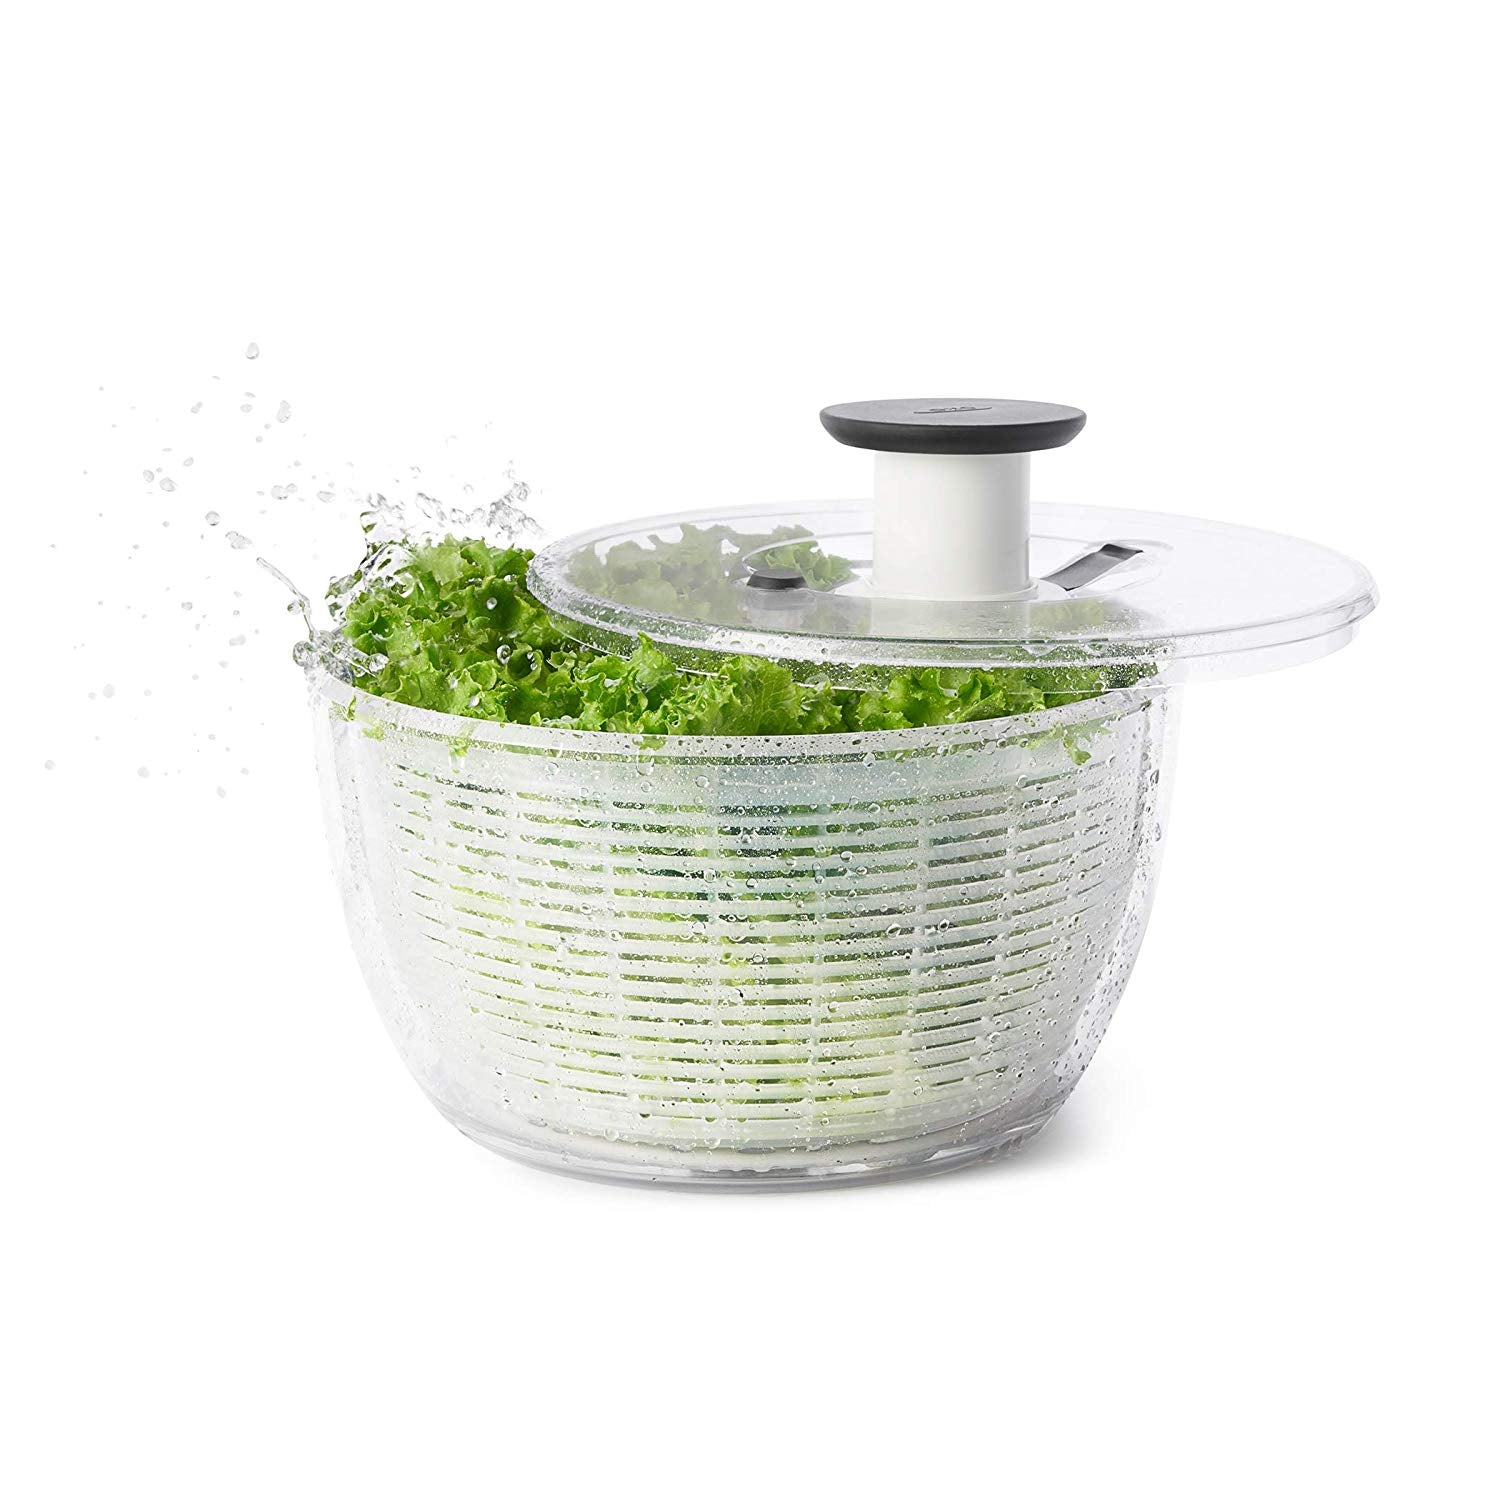 OXO 32480 Good Grips Salad Spinner, Large, Clear - The Luxury Home